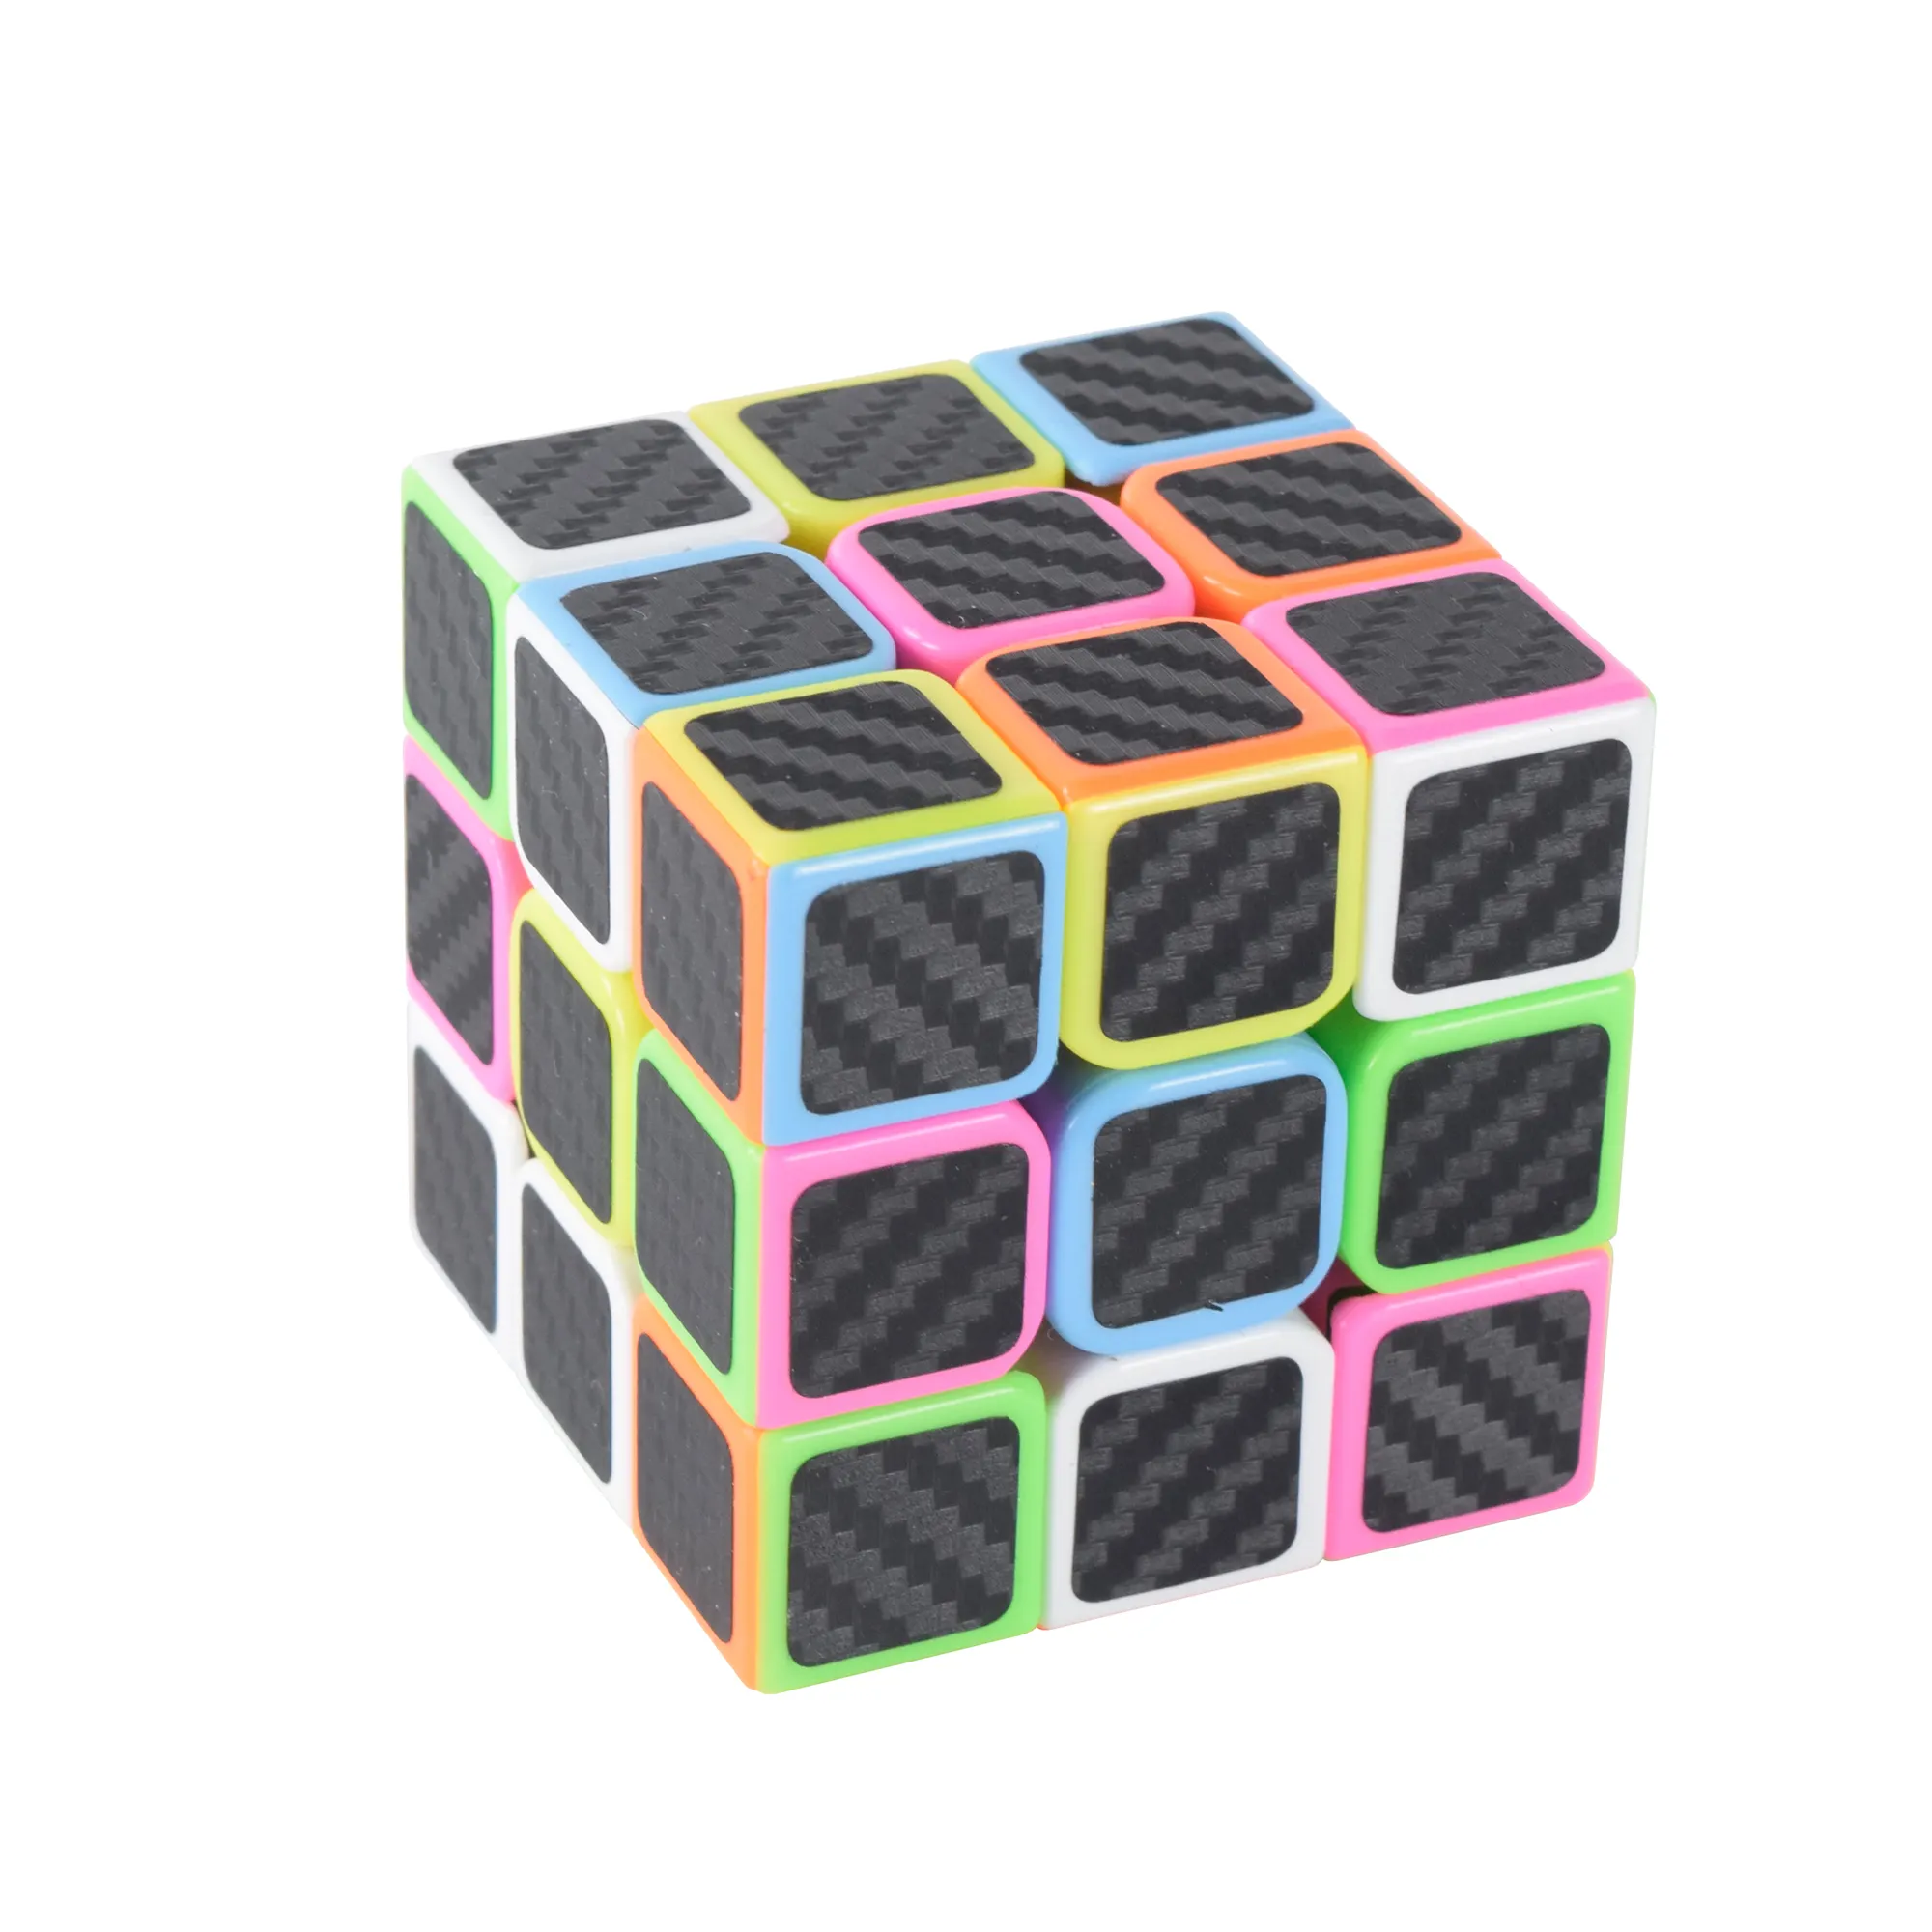 Factory Directly 3x3 Magic Cubes Stickerless 3 Layers Speed Magic Cube